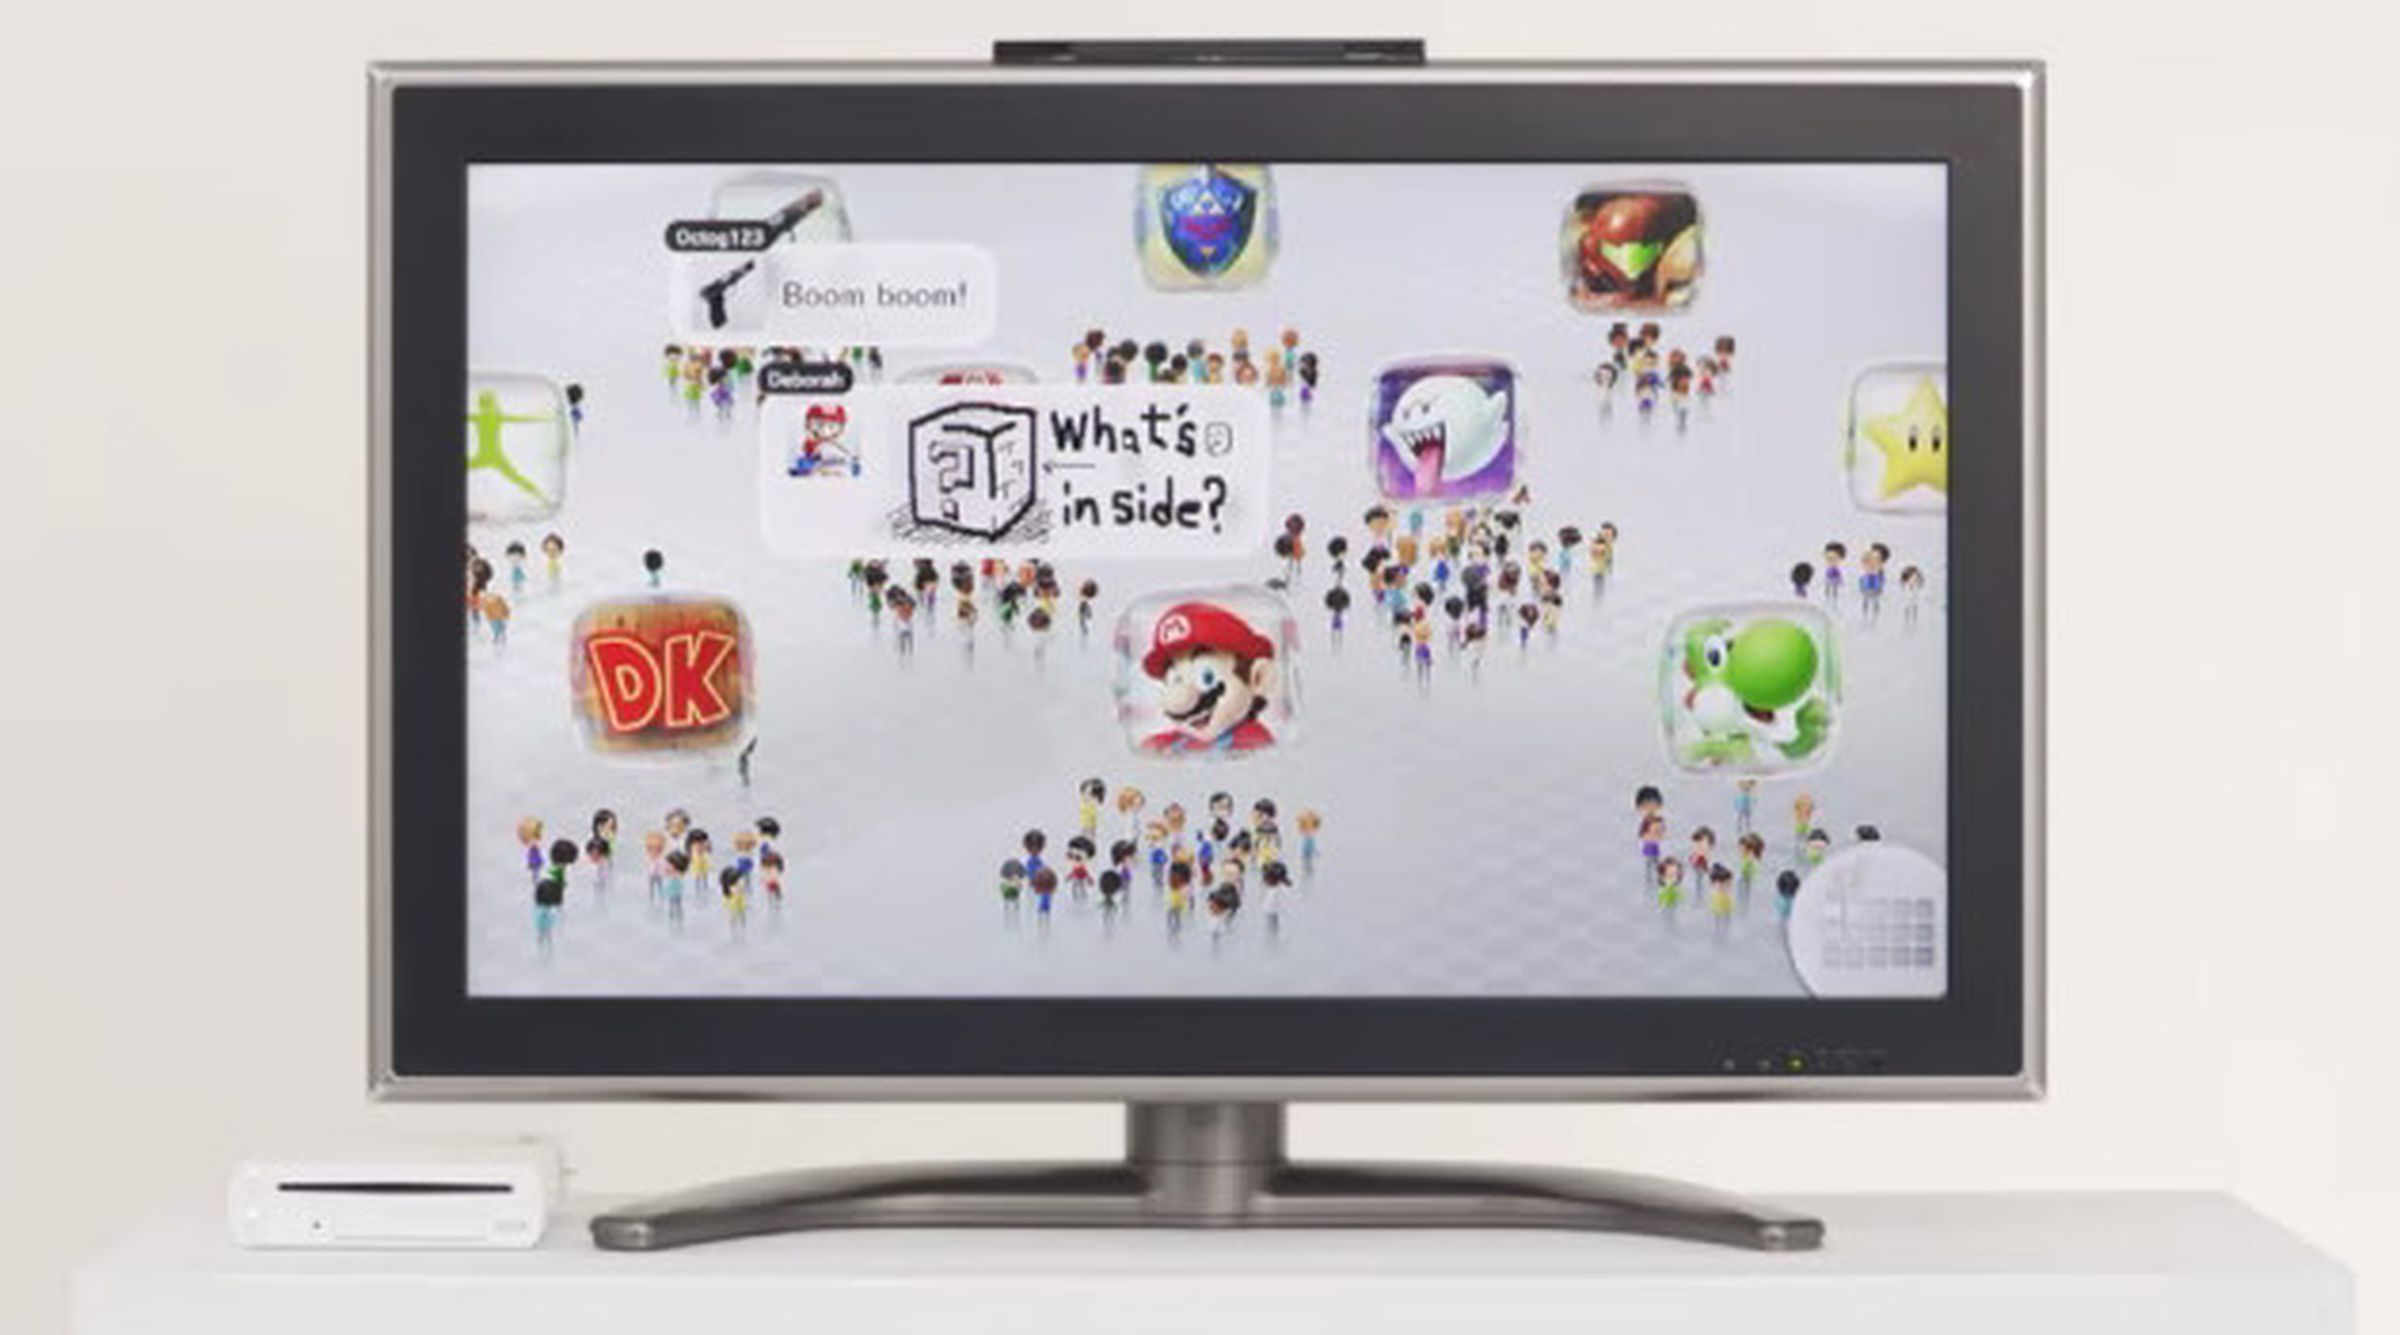 Wii U console officially revealed at Nintendo's pre-E3 press conference